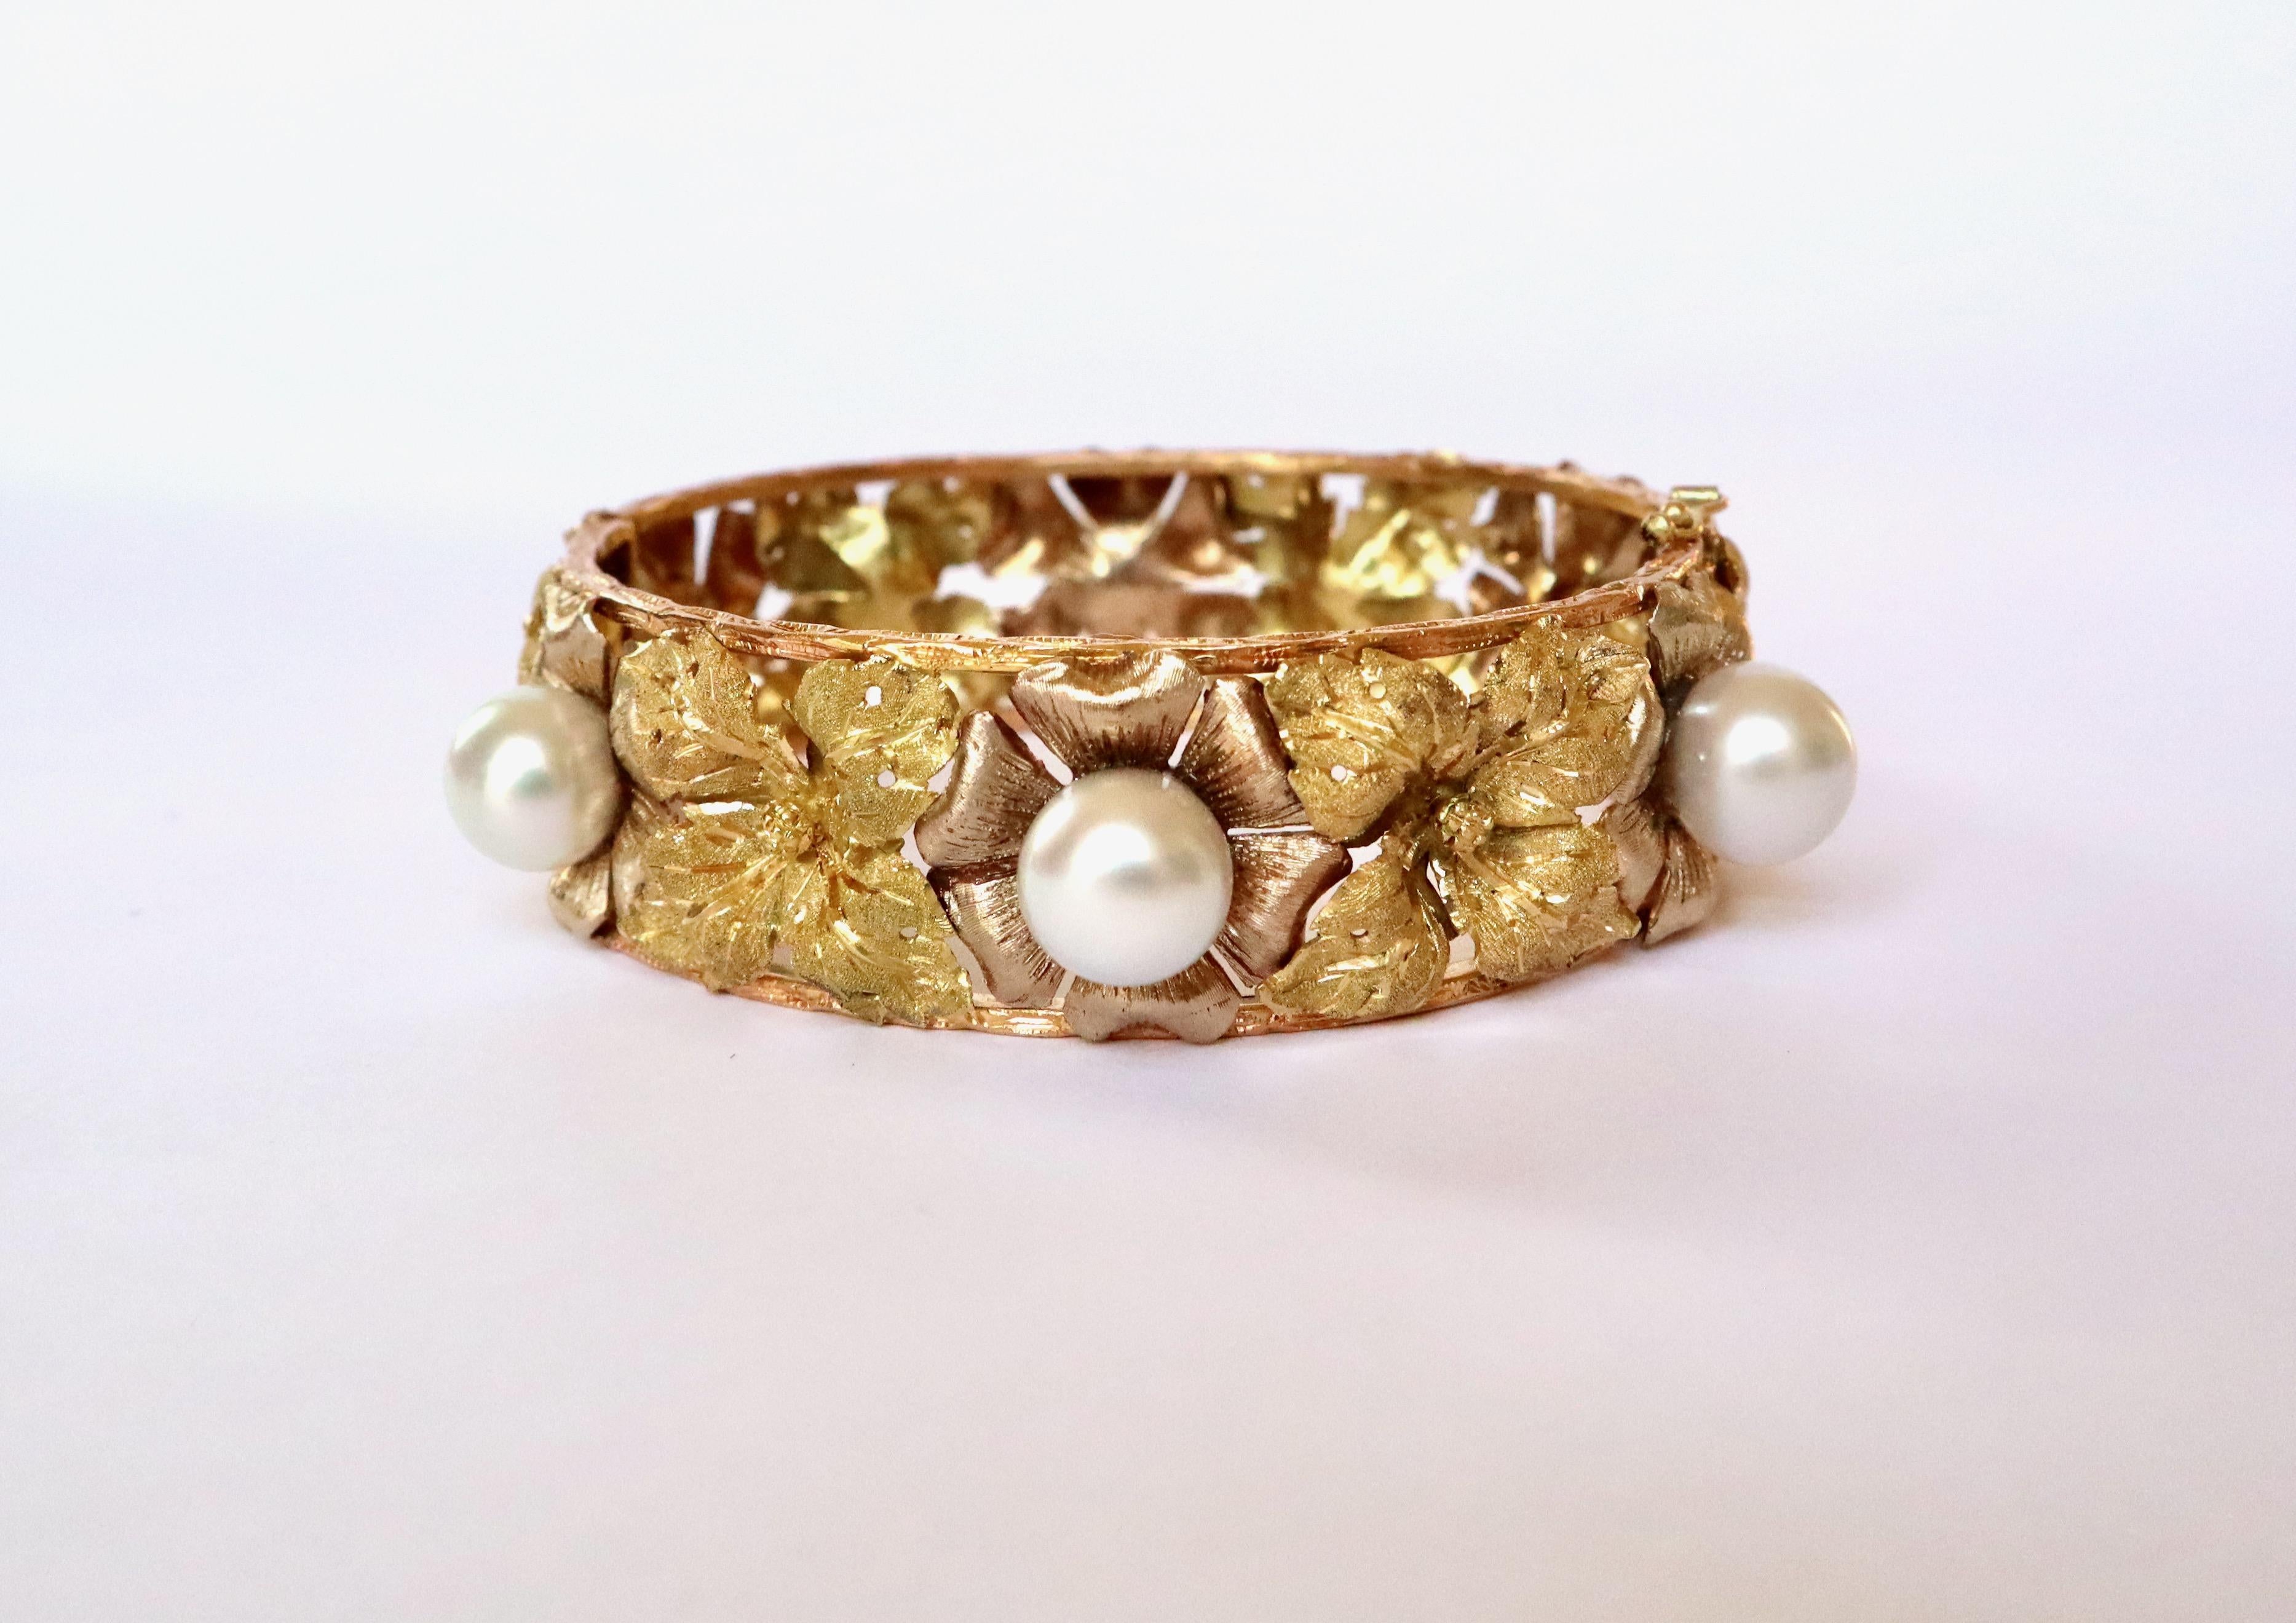 Uncut Buccellati Rigid Bracelet Yellow, White and Pink Gold Pearls For Sale